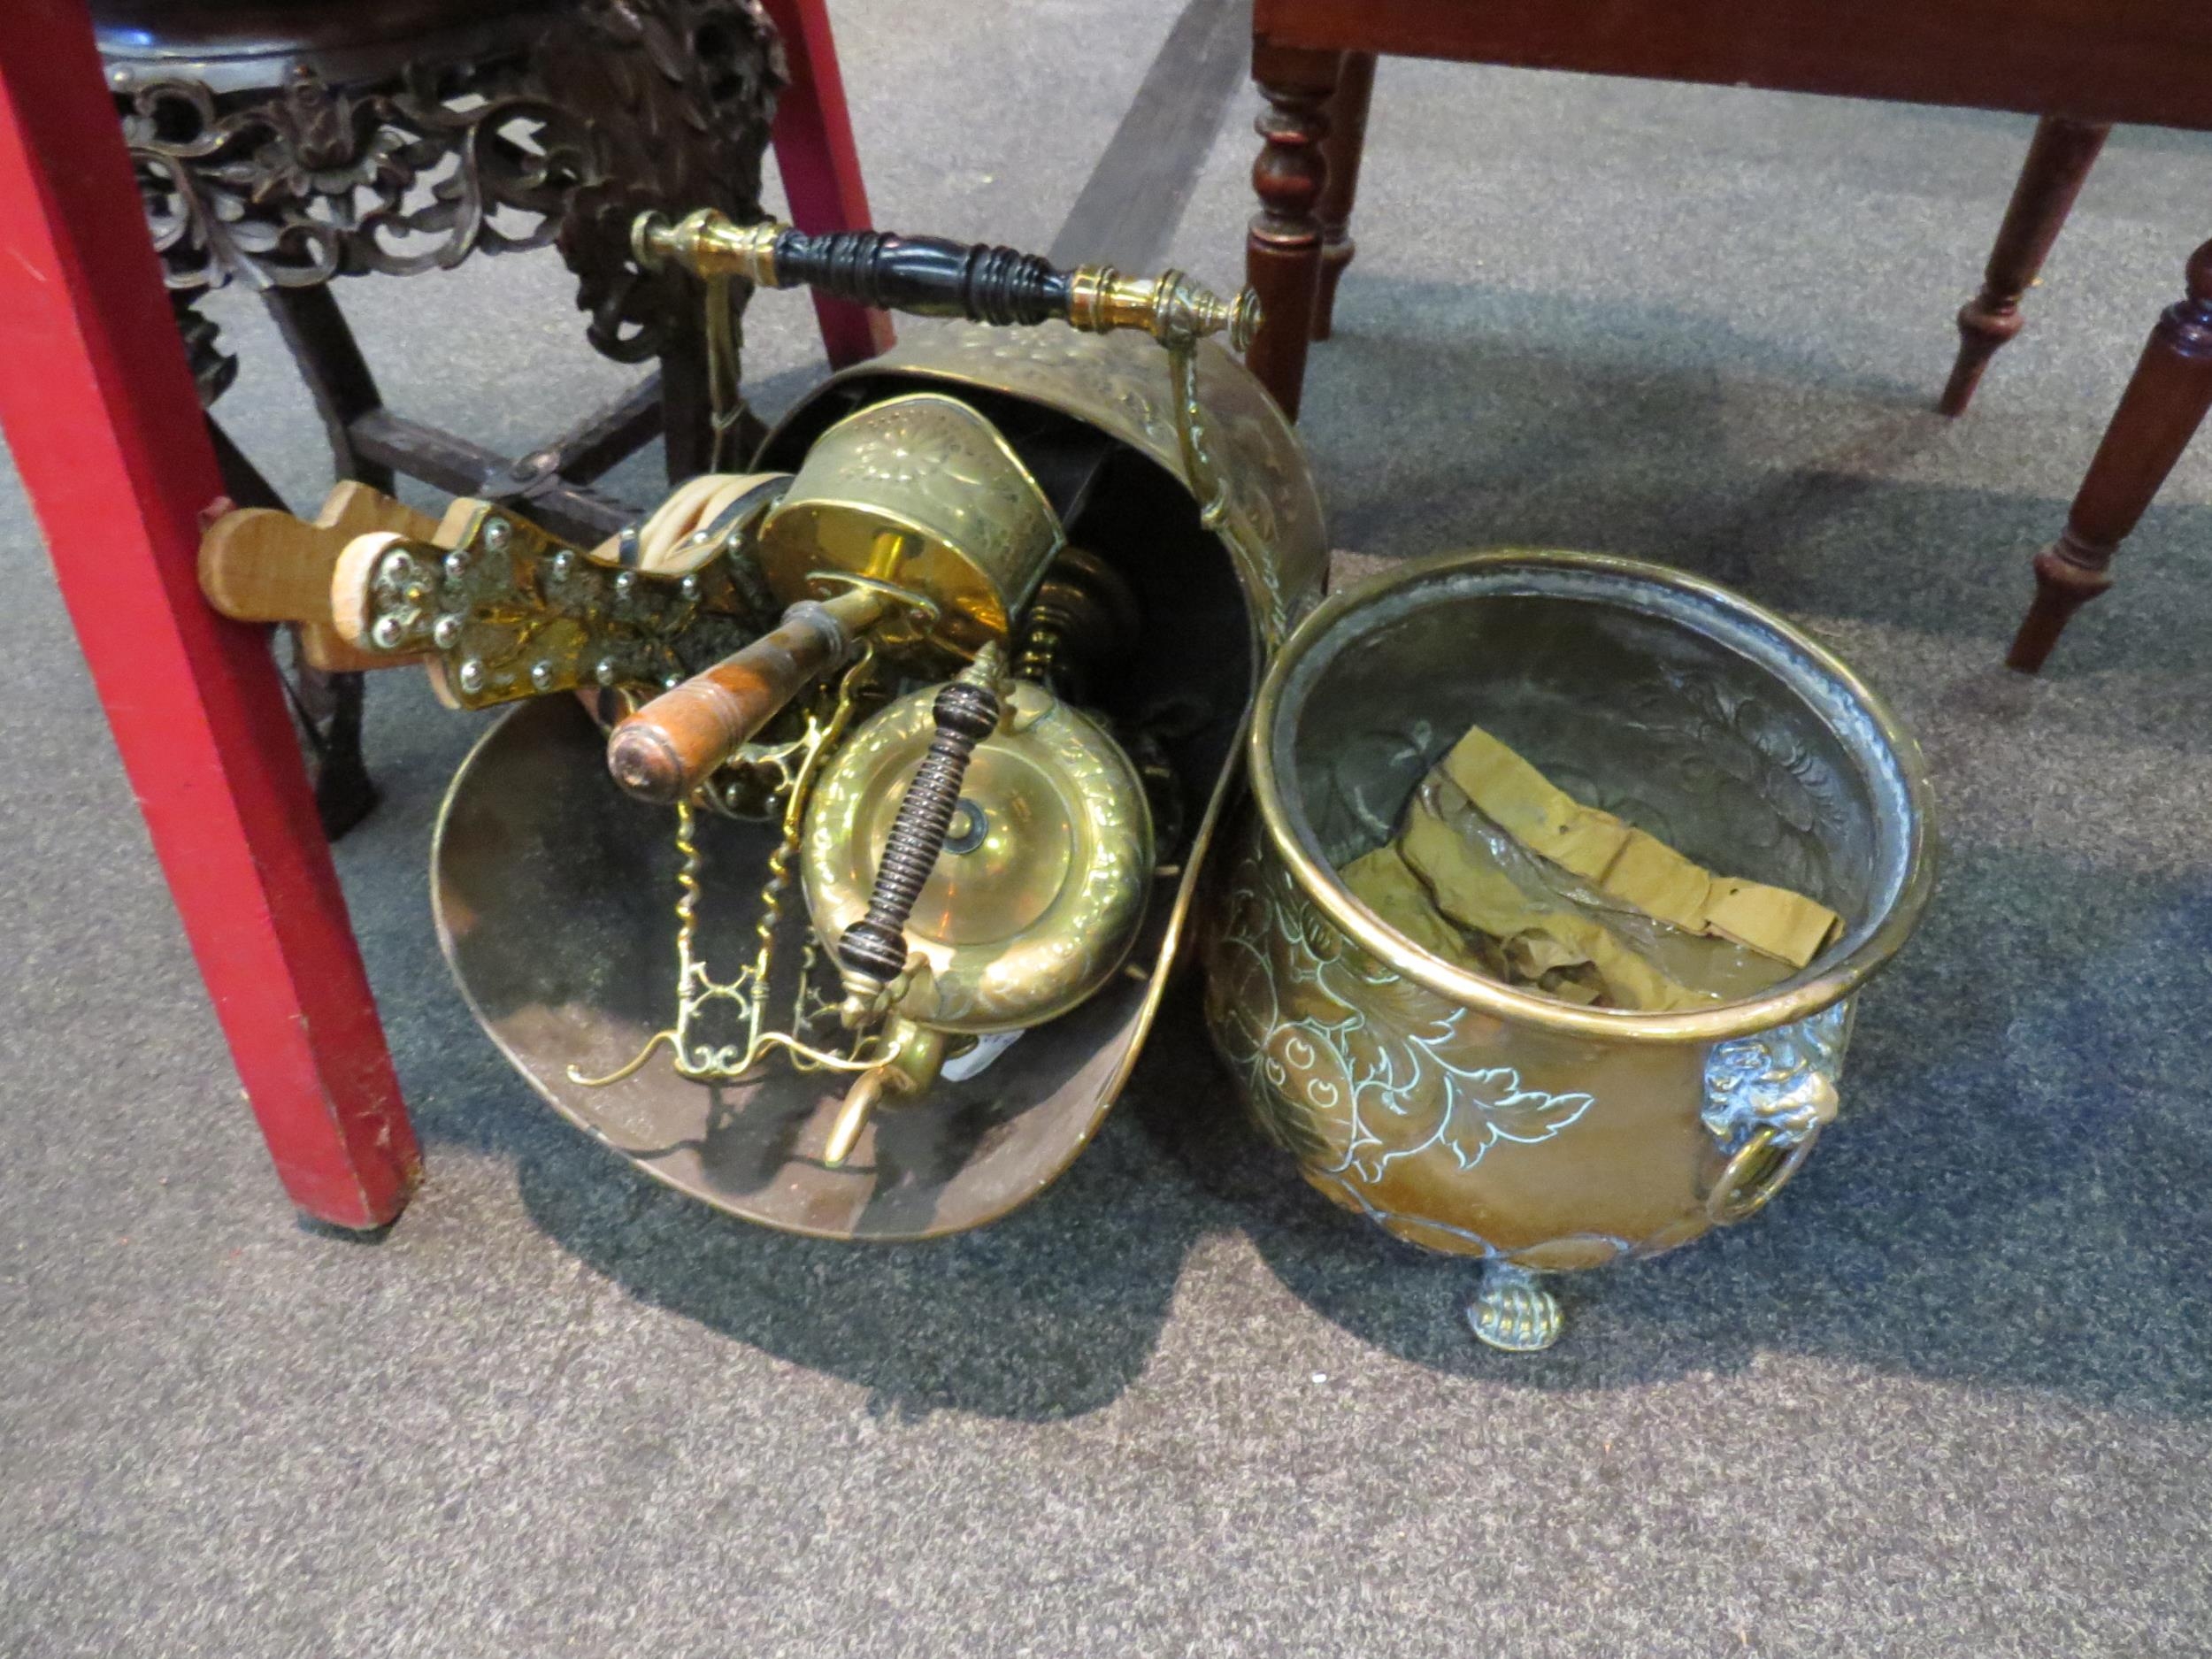 Assorted brassware including candlesticks, a coal scuttle and scoop, tea kettle on stand, etc.